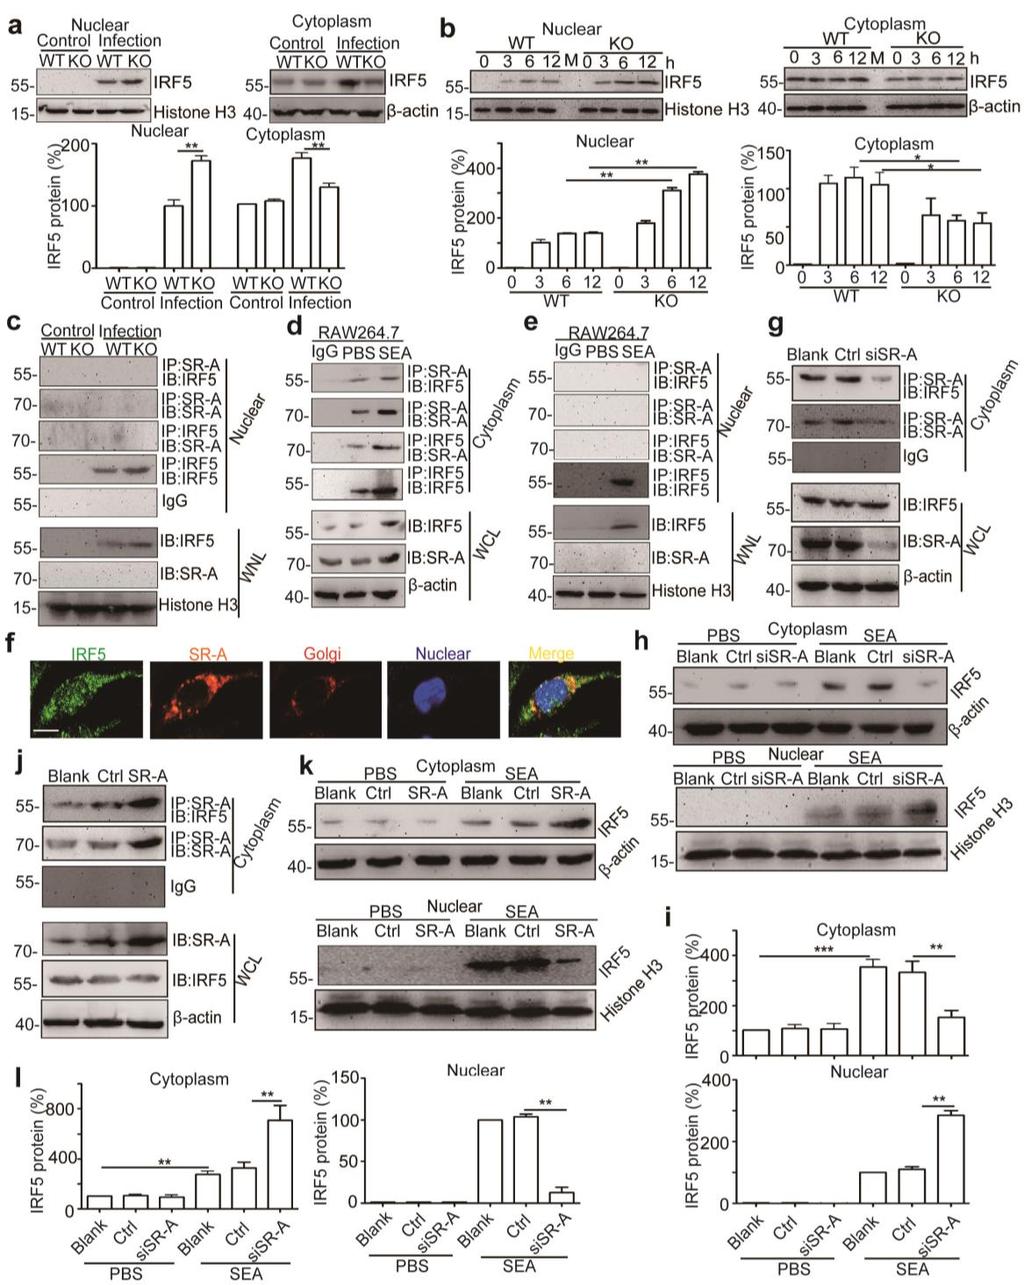 Supplementary Figure 8, Related to Figure 6: SR-A interacts with IRF5 in cytoplasm and inhibits IRF5 nuclear transfer (a) Immunoblot analysis of IRF5 protein in nuclear and cytoplasmic fractions of